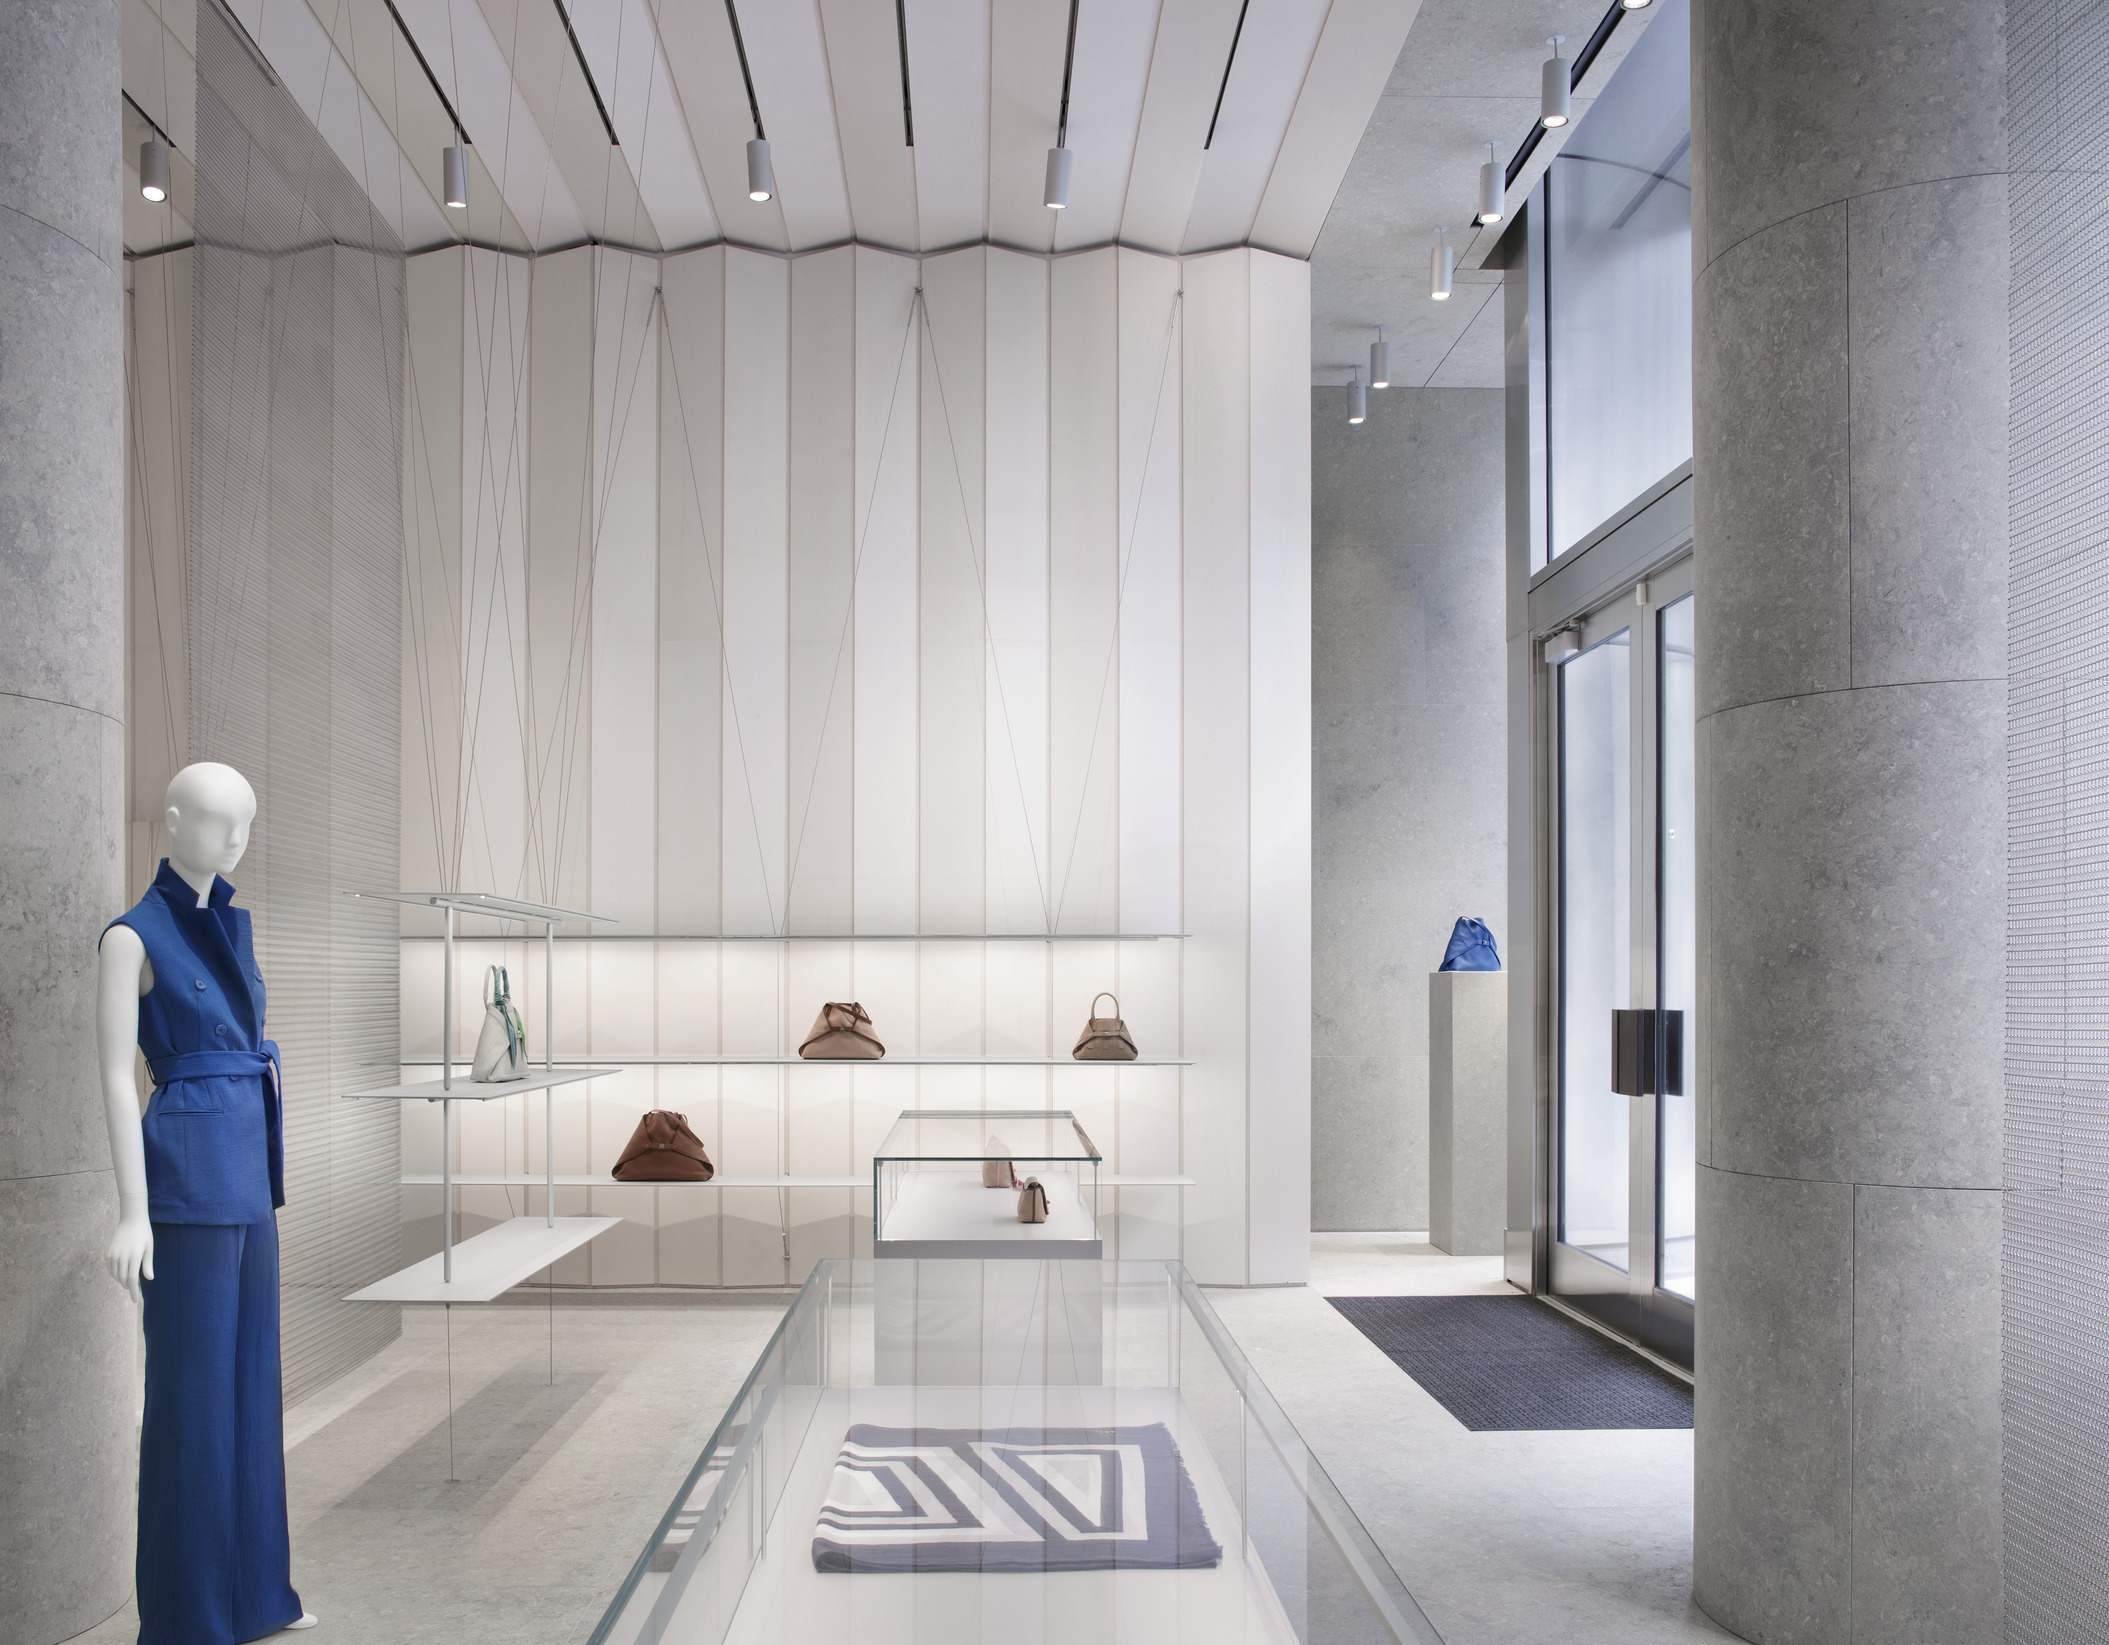 Akris boutique concept develops through a three-dimensional architecture and a light-weight display system.